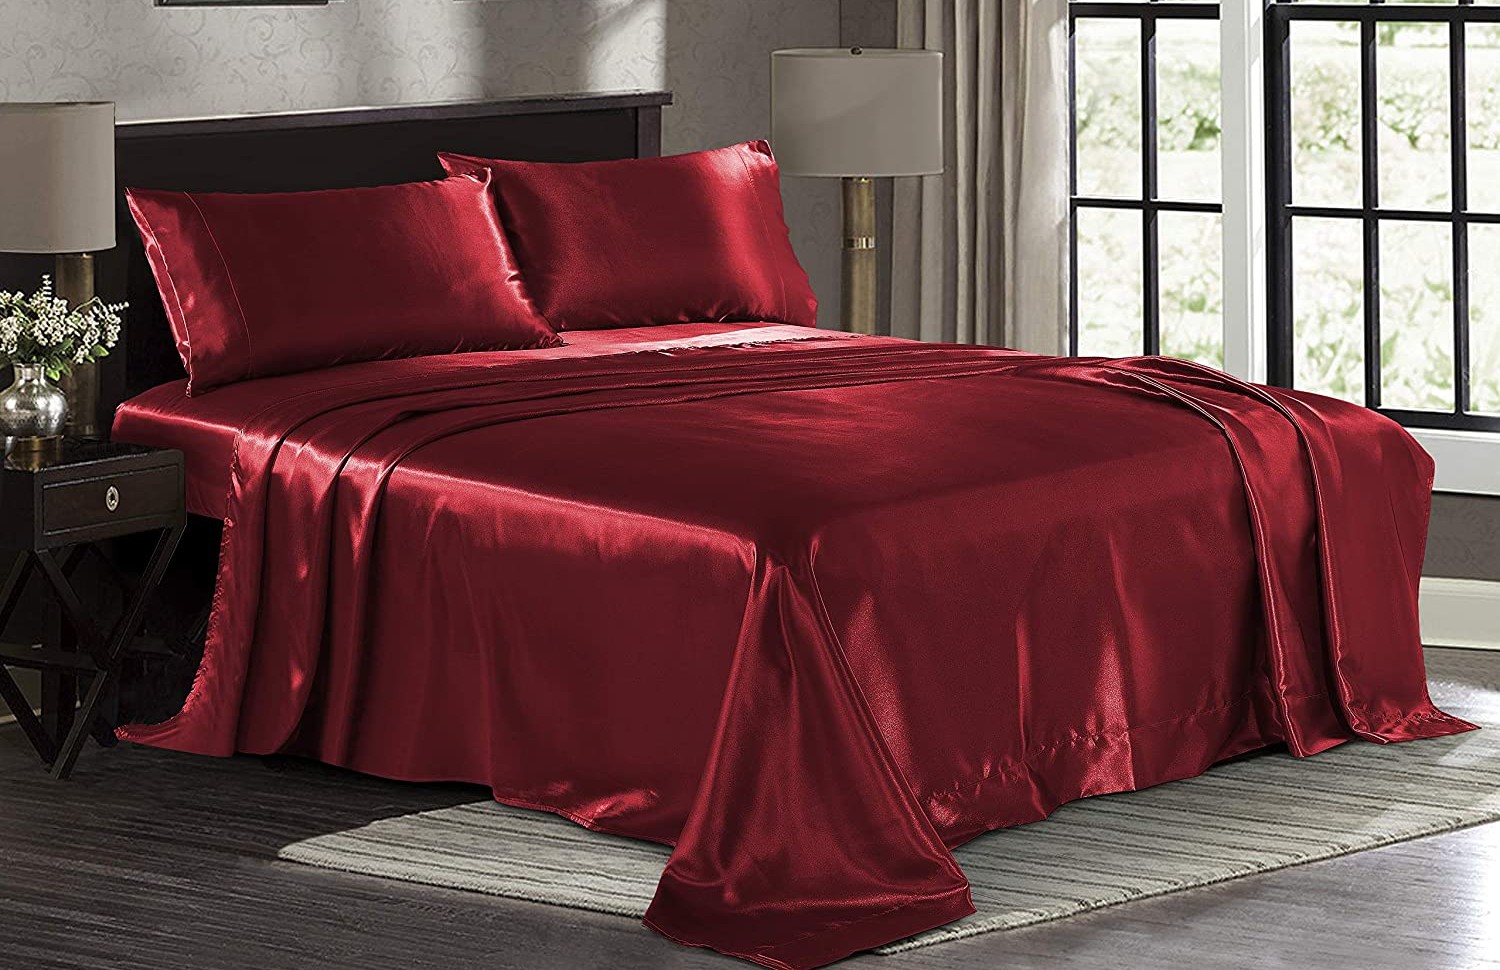 The Best Satin Sheets Options